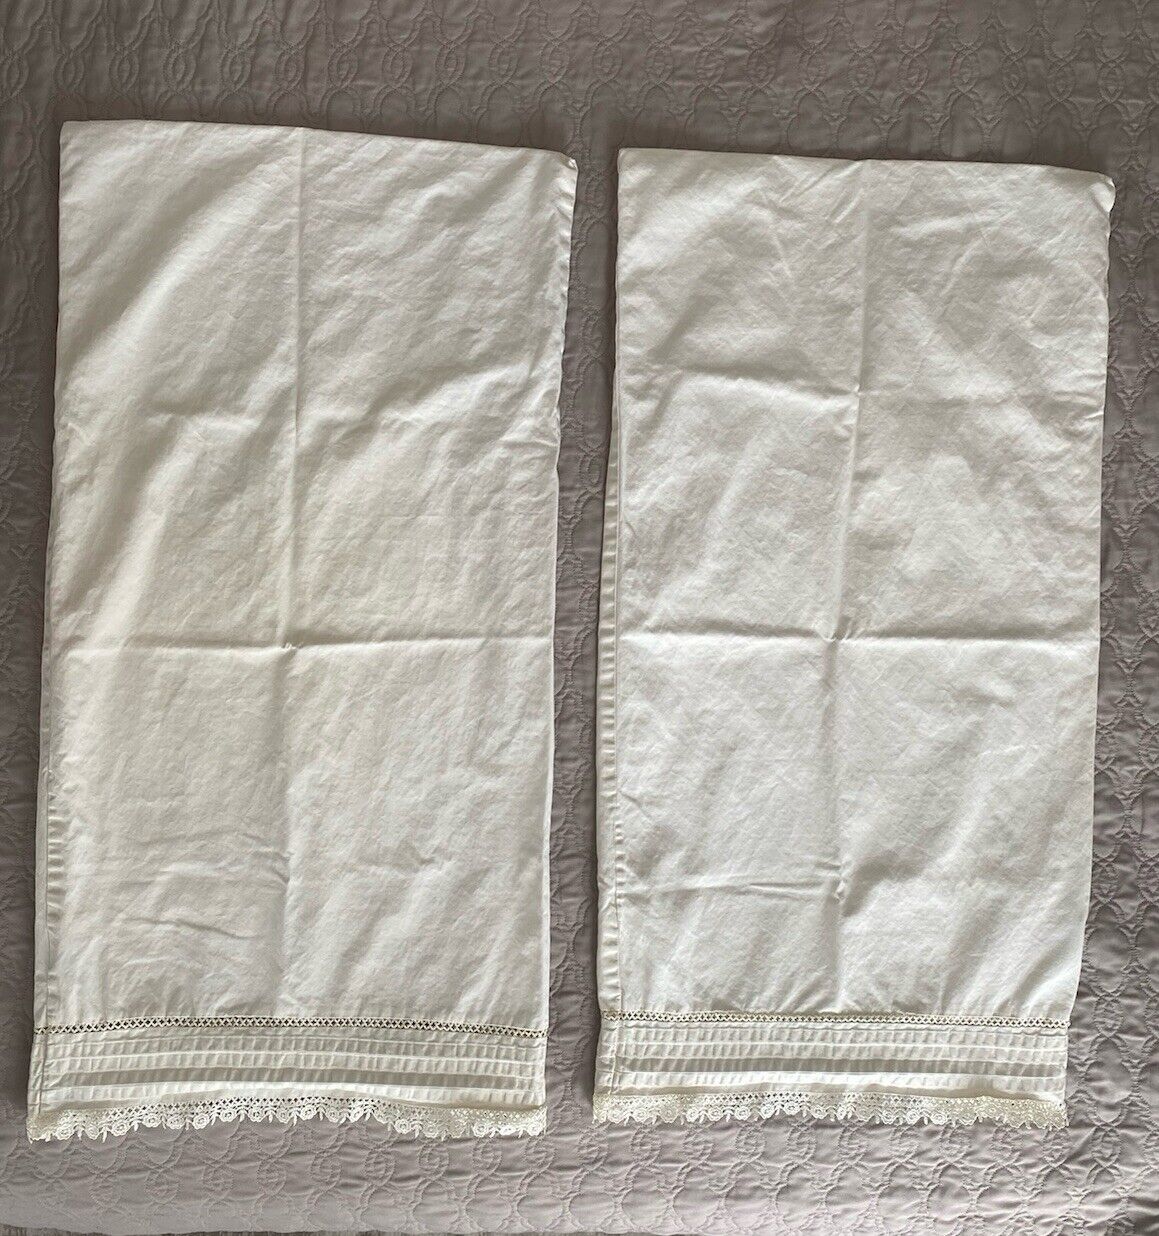 Eileen West Pillowcases King Cream Lace Lapped Scalloped Cottage Vintage Pair